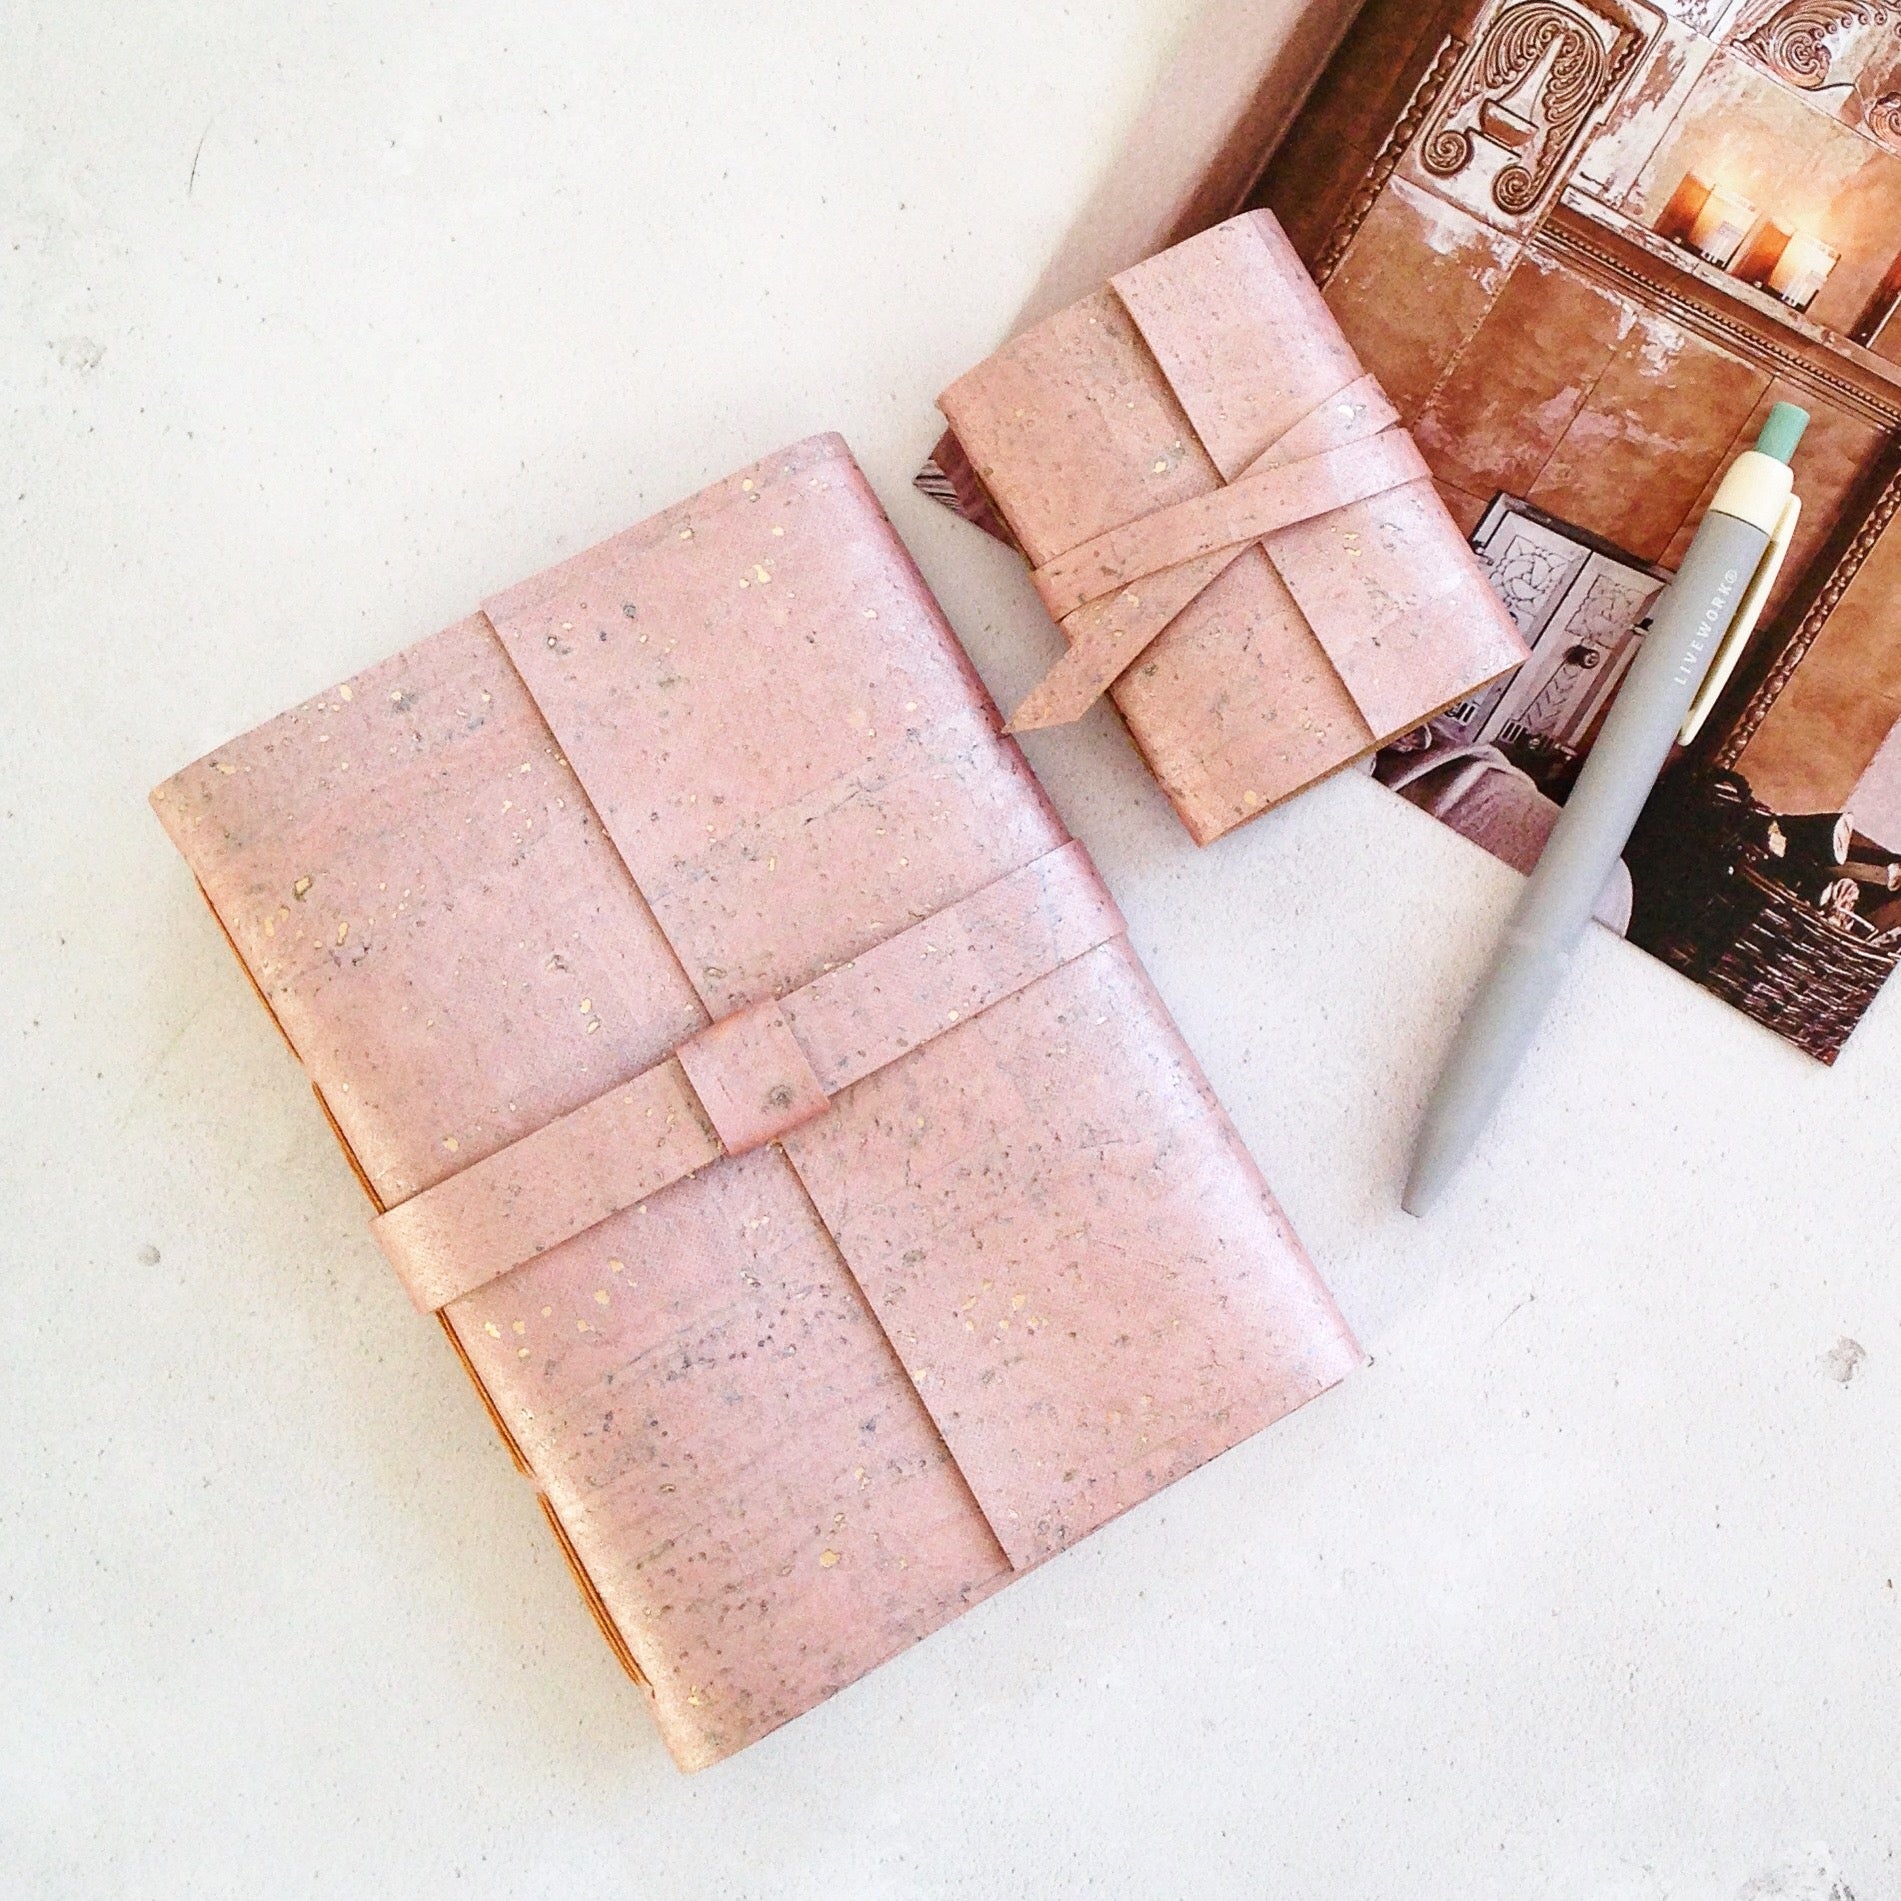 Cork journal / sketchbook bound in Rose Gold and Tan, a vegan stationery gift bound by hand in the UK